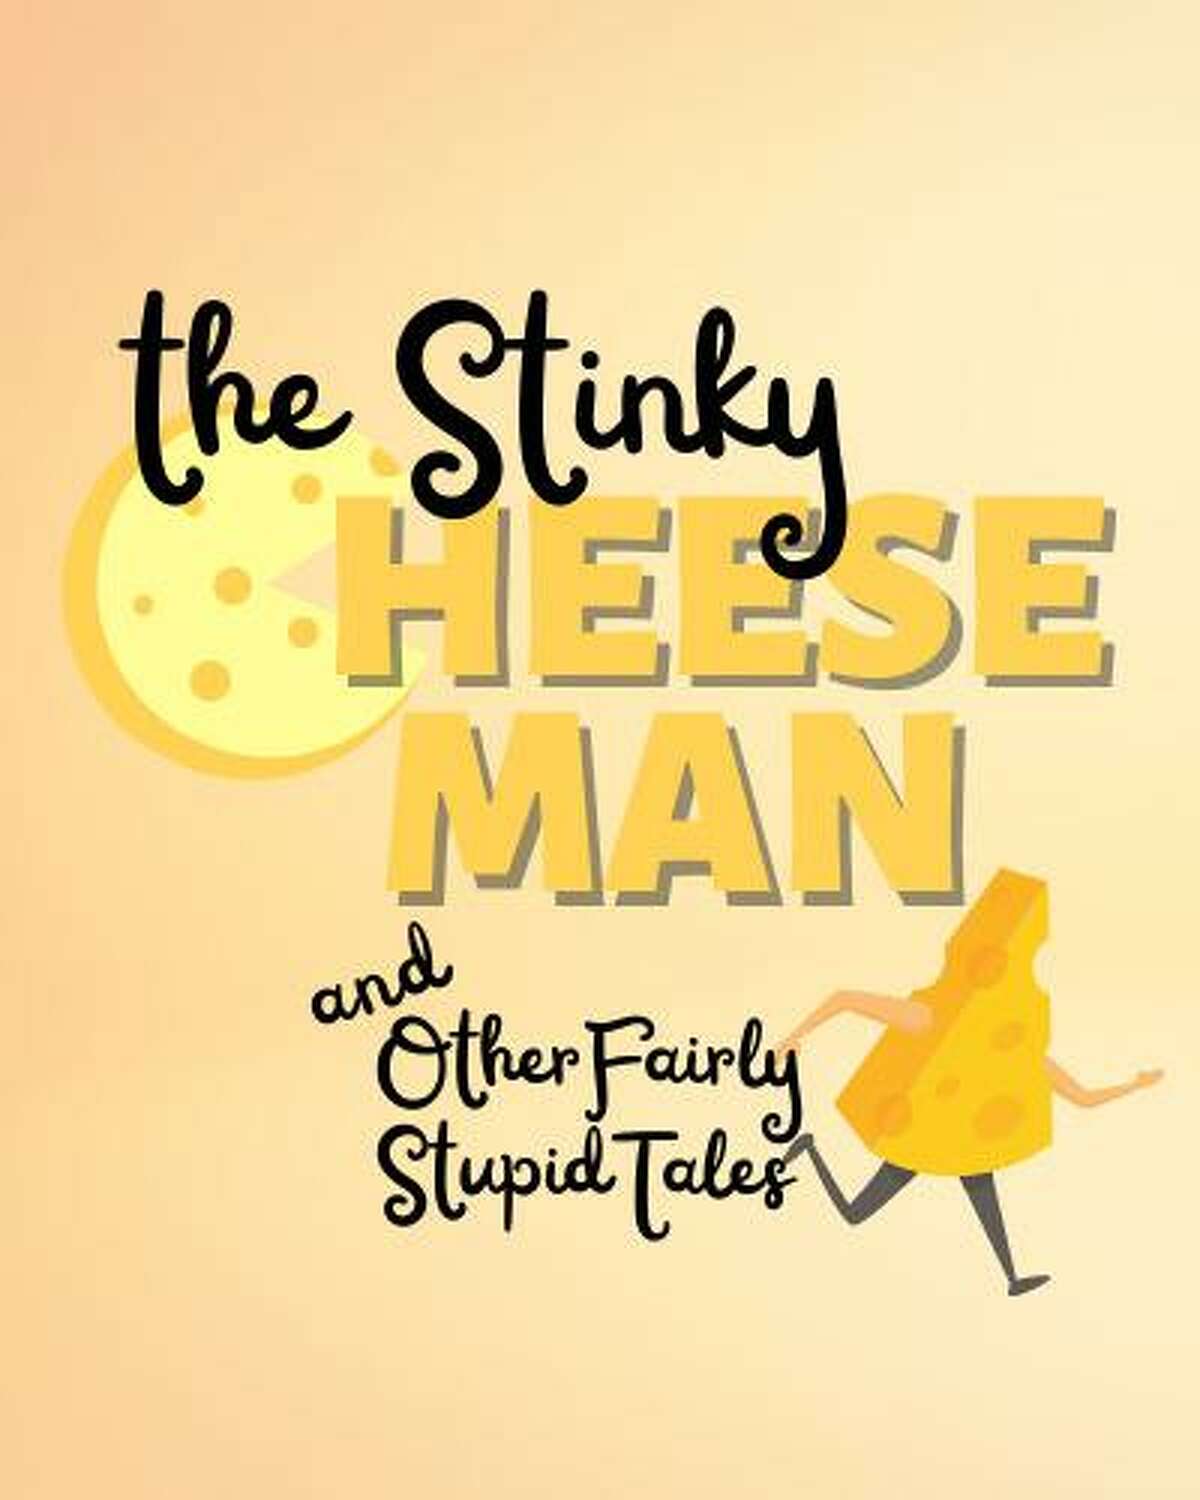 The Warner Theatre’s Warner Stage Company is presenting its first Stage @ the Warner production of 2021: “The Stinky Cheese Man (And Other Fairly Stupid Tales)” Aug. 14 at Coe Memorial Park, Torrington.